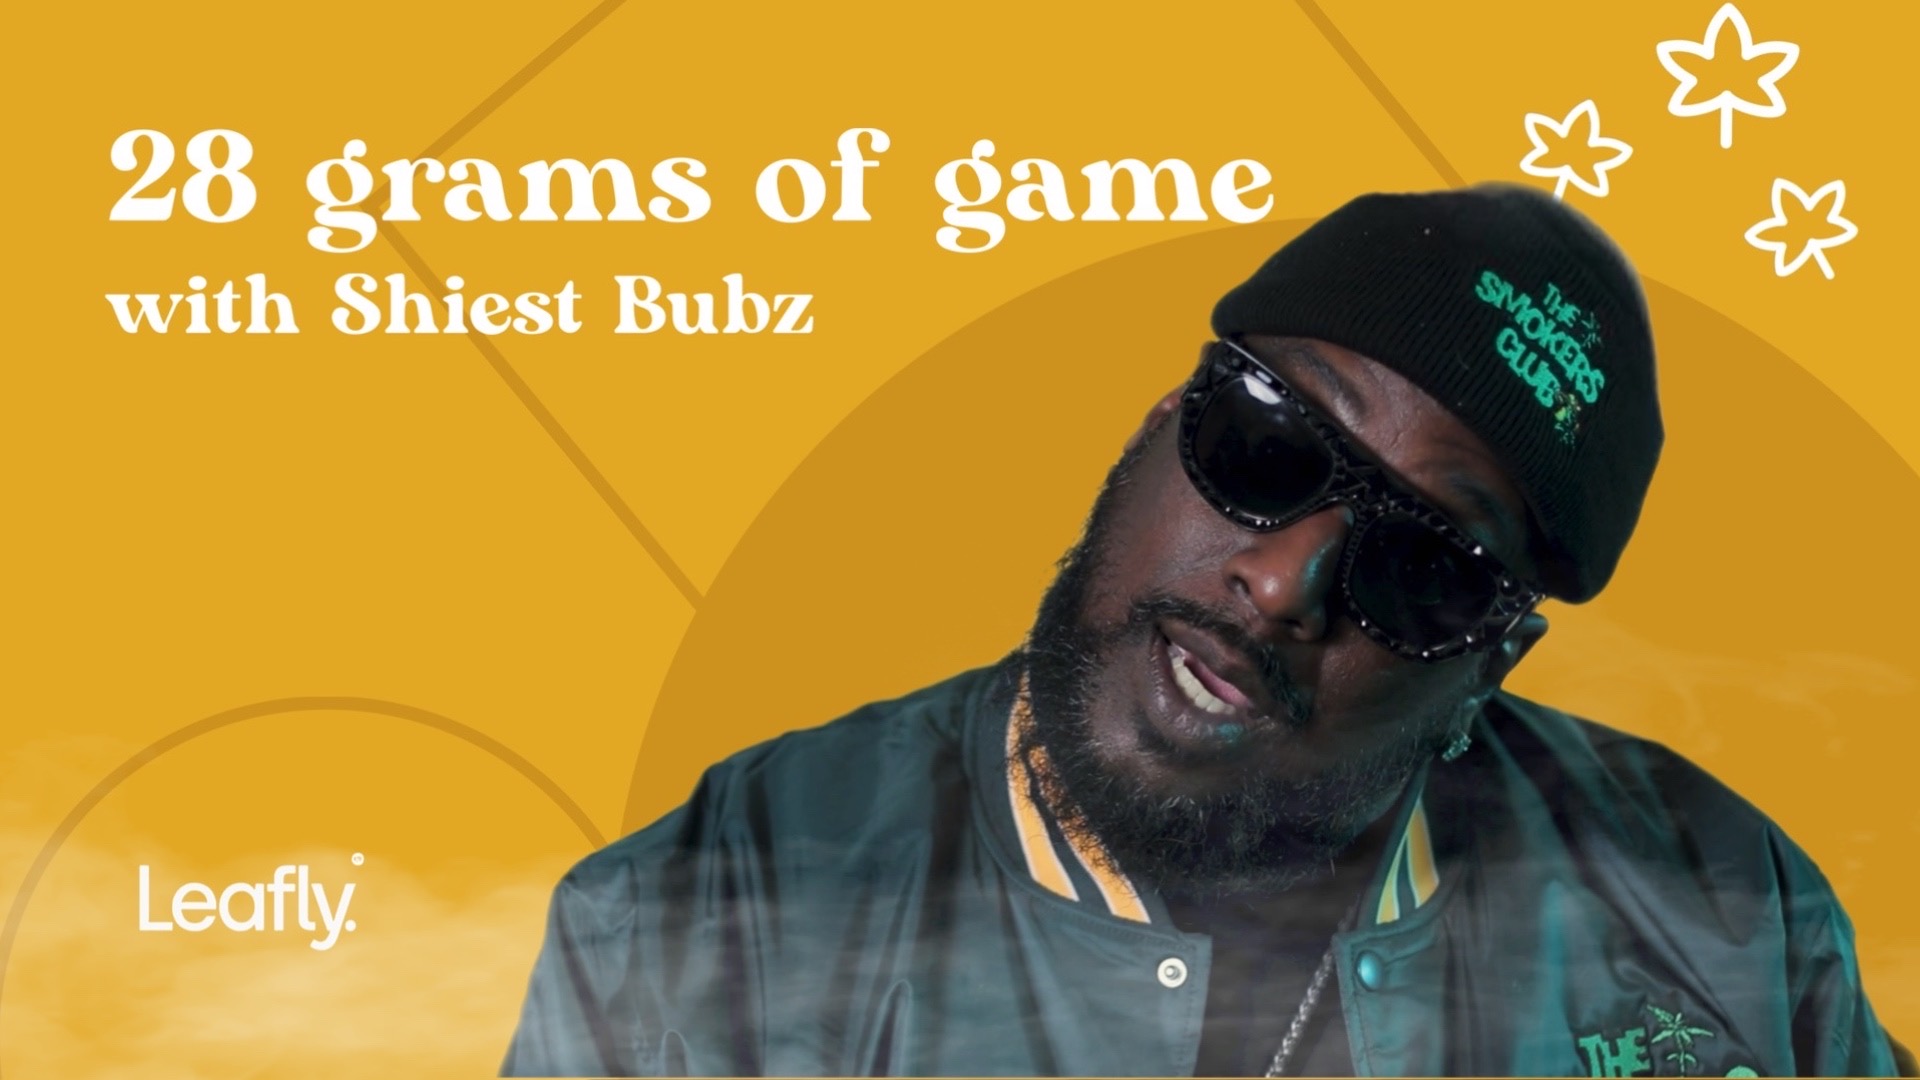 28 grams of game: Shiest Bubz is legend